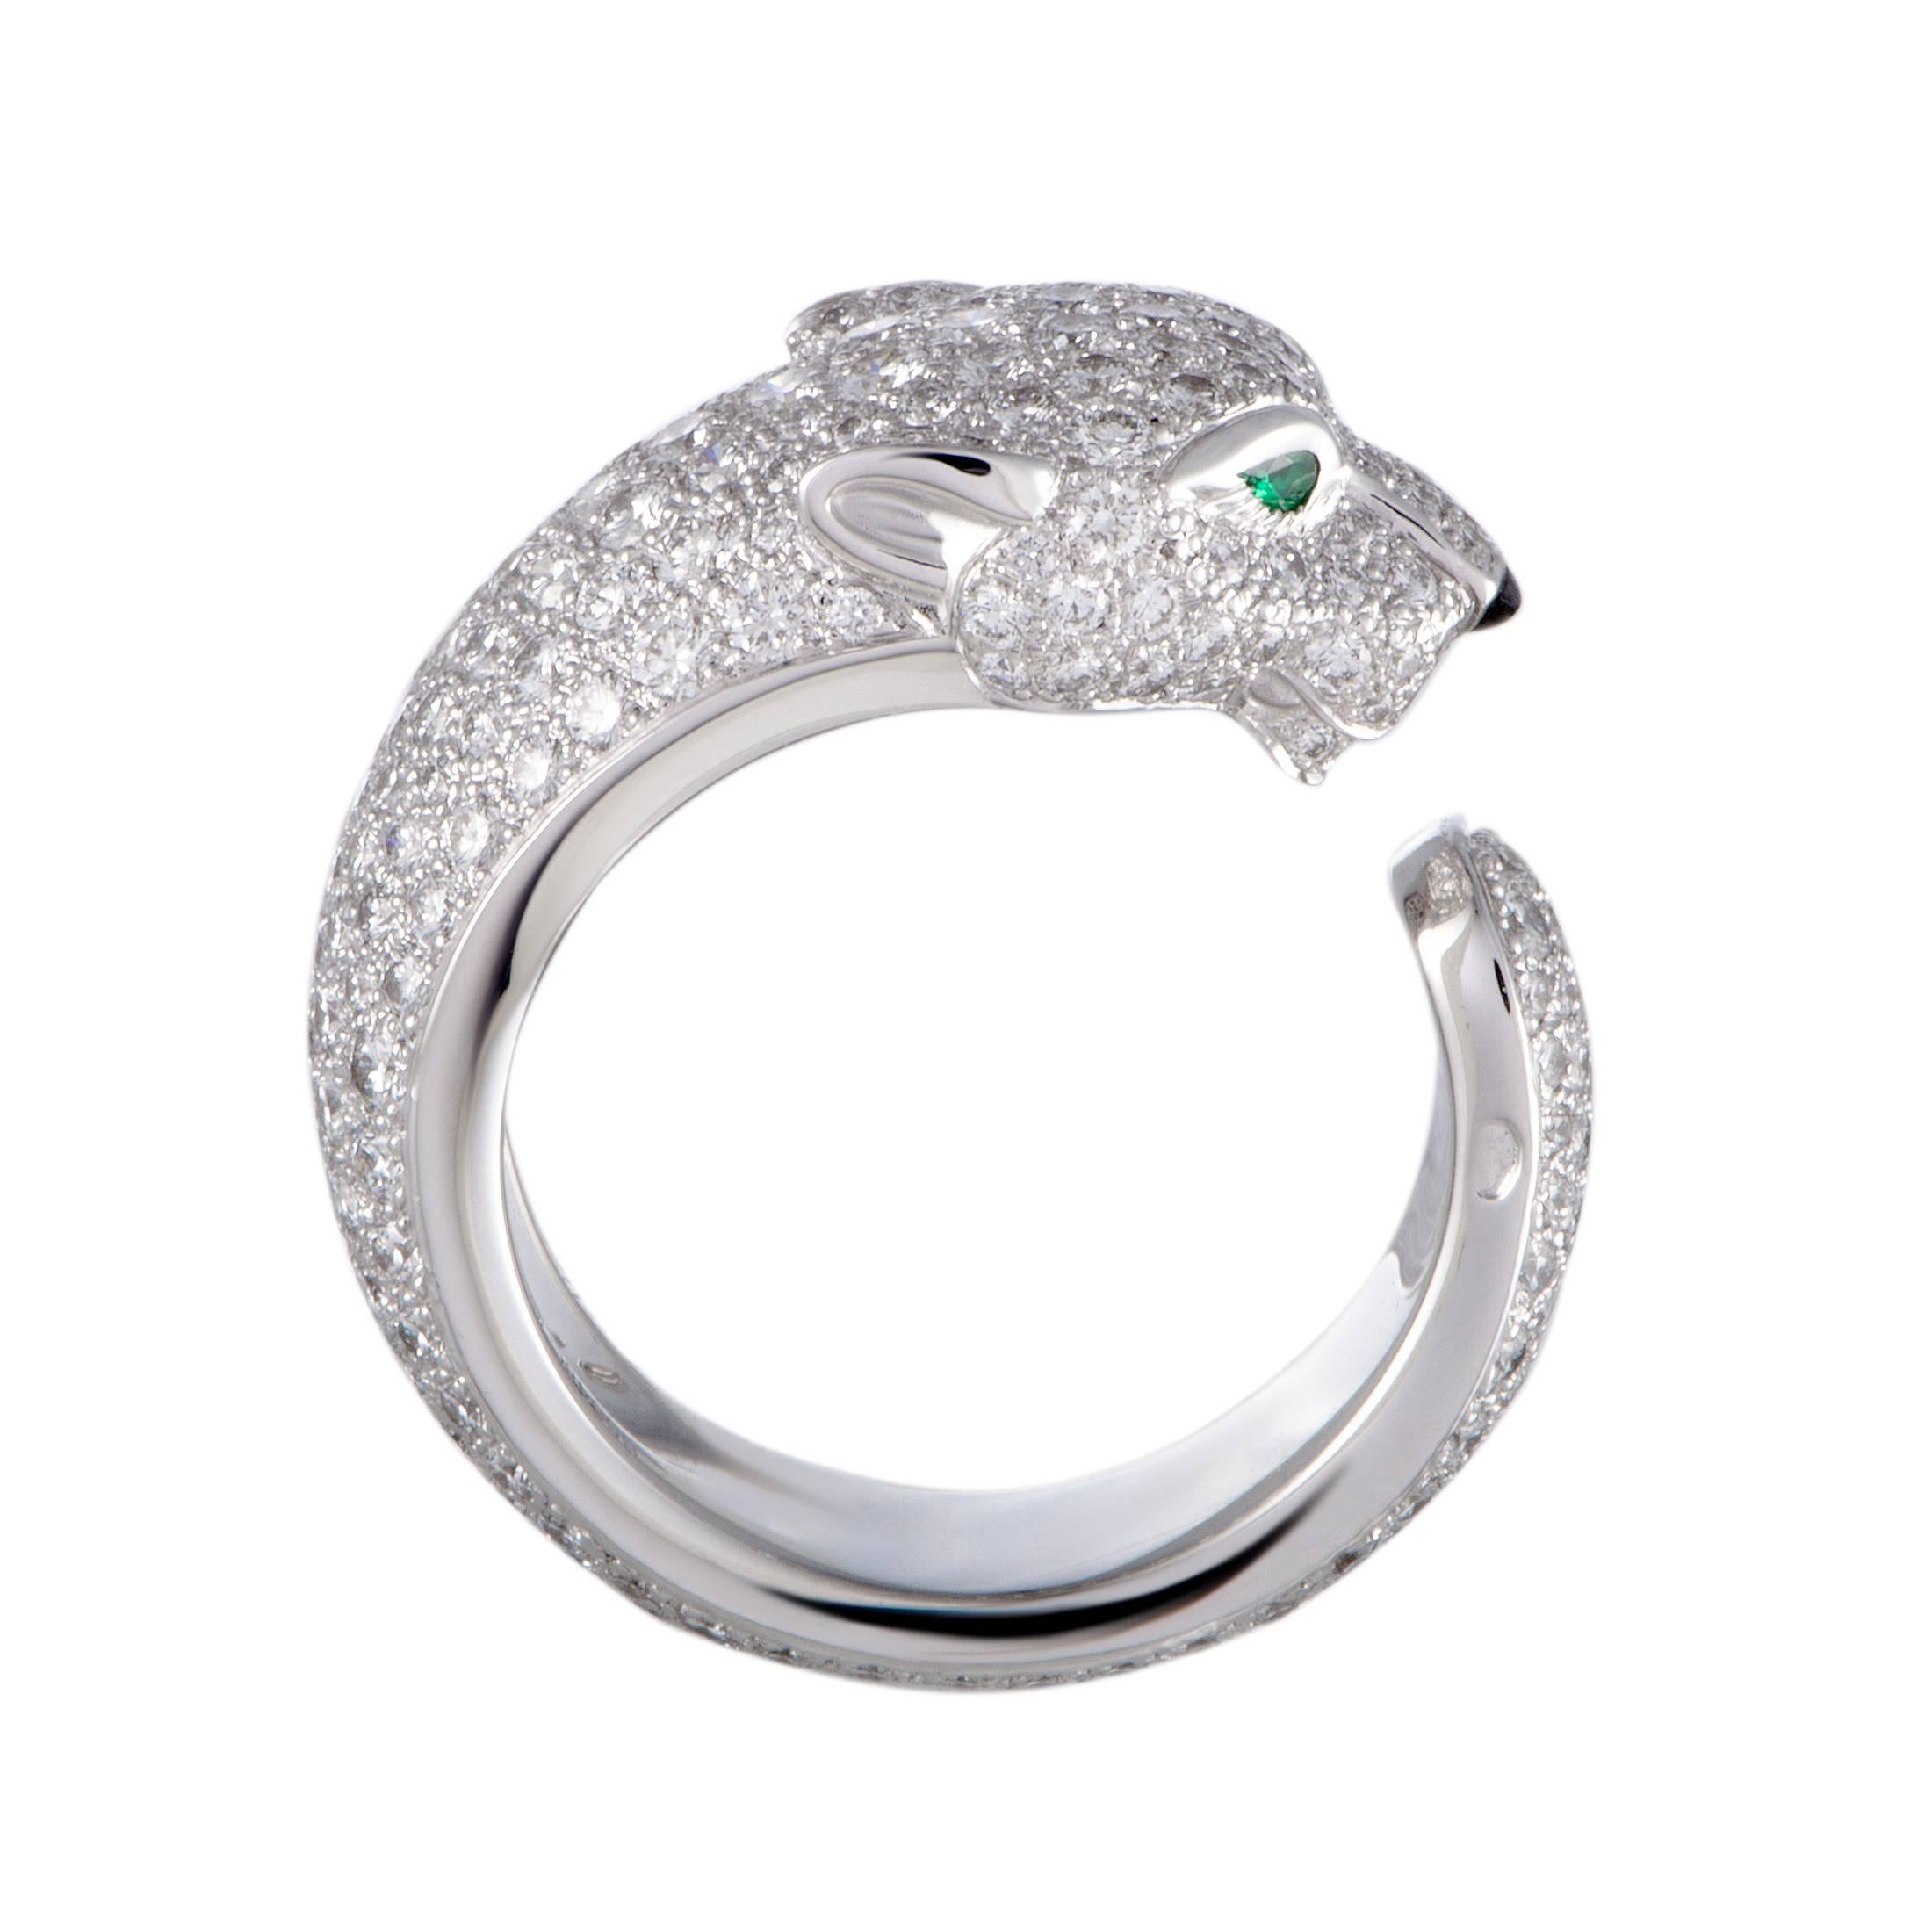 Presenting Cartier's famous motif of a panther in a stunningly extravagant manner, this fascinating ring boasts an endearingly fashionable appeal. The ring is made of 18K white gold and set with emerald, onyx, and 2.39 carats of diamond stones.
Ring